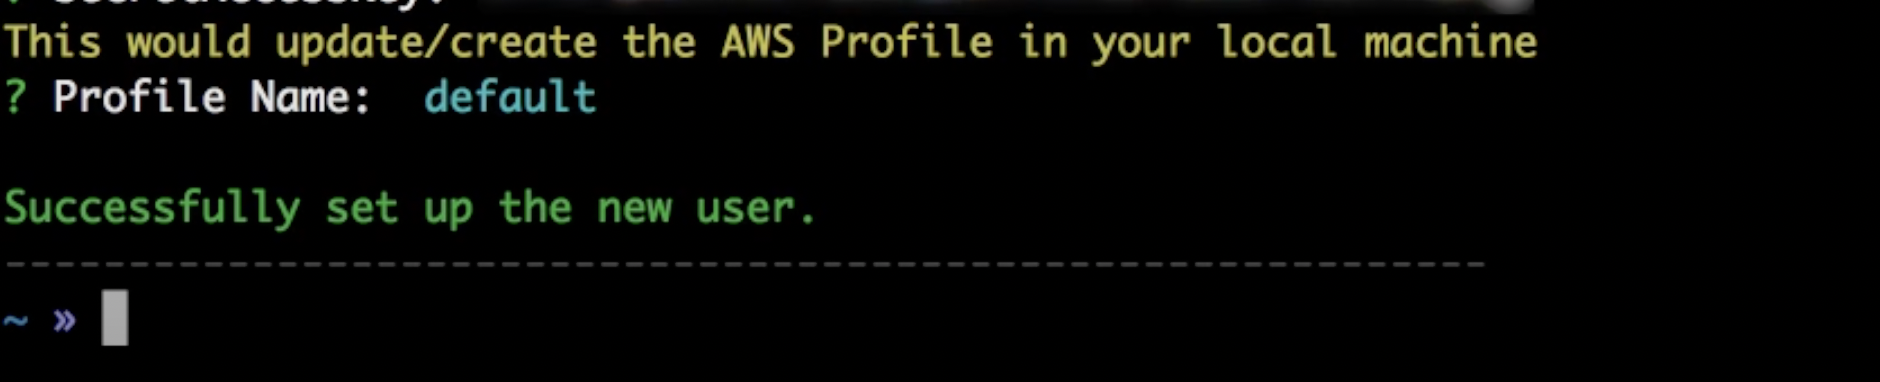 create a profile name on your local machine